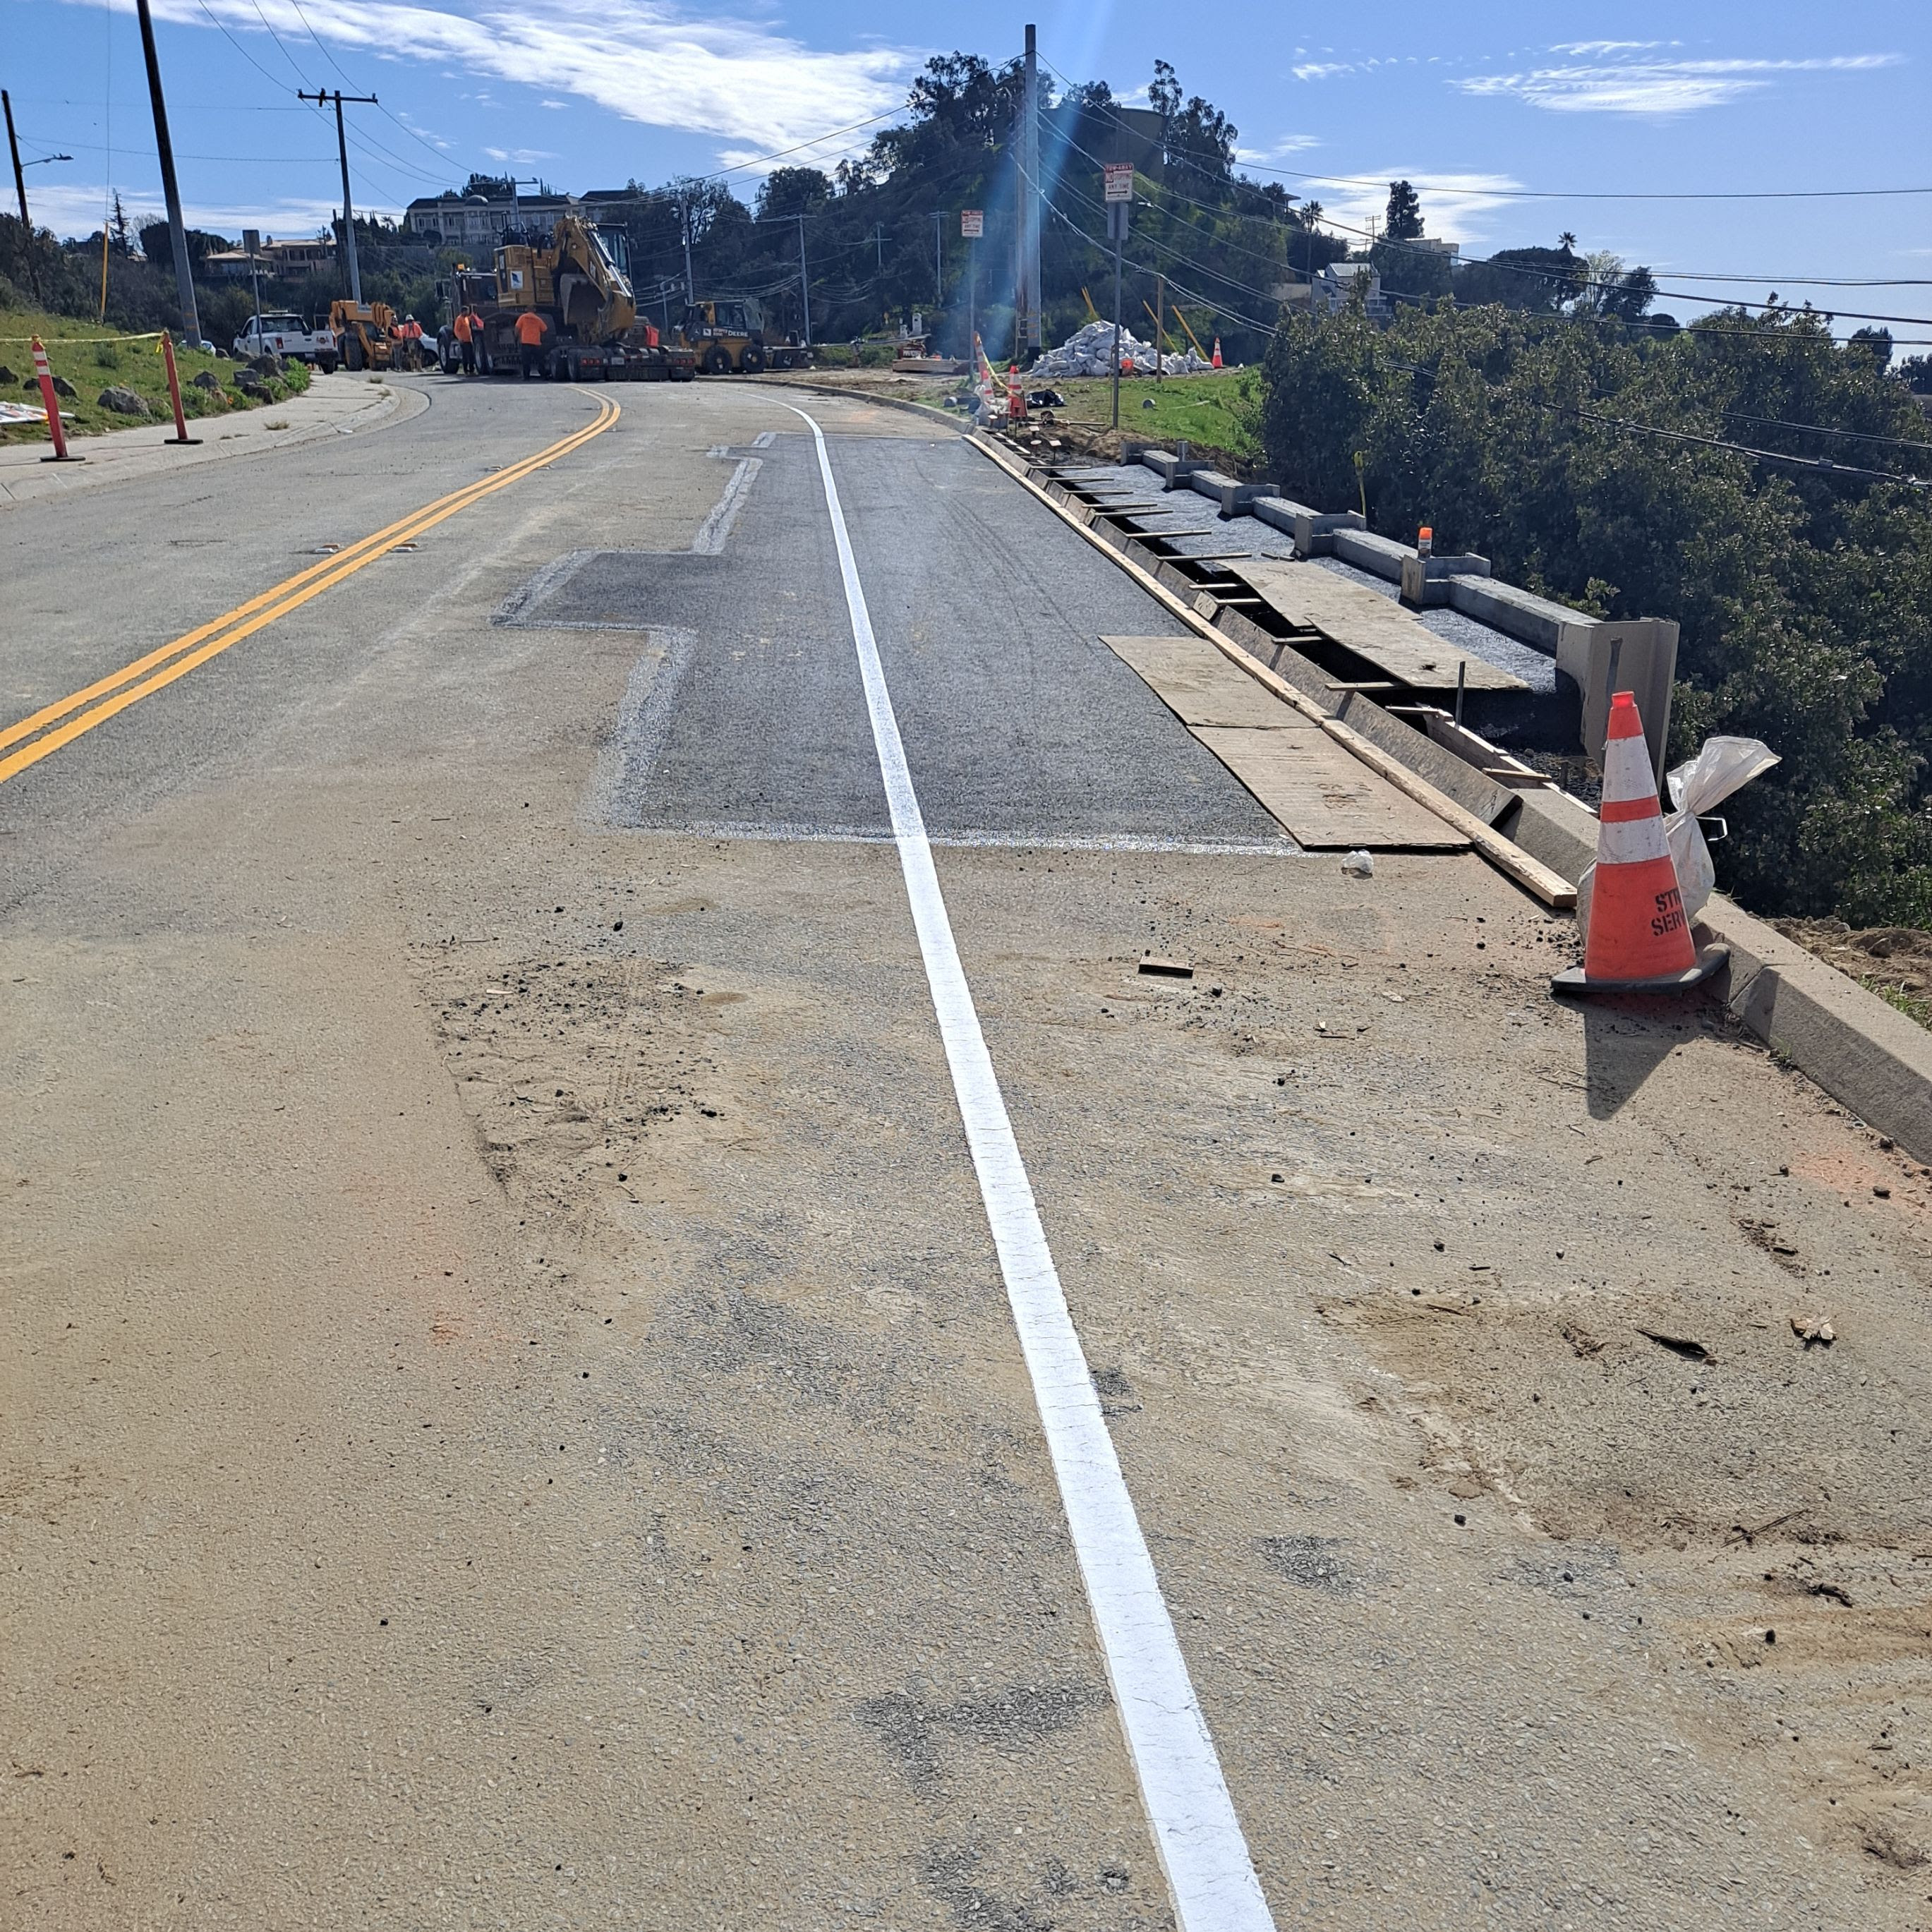 Mulholland Drive Reopened To Traffic After